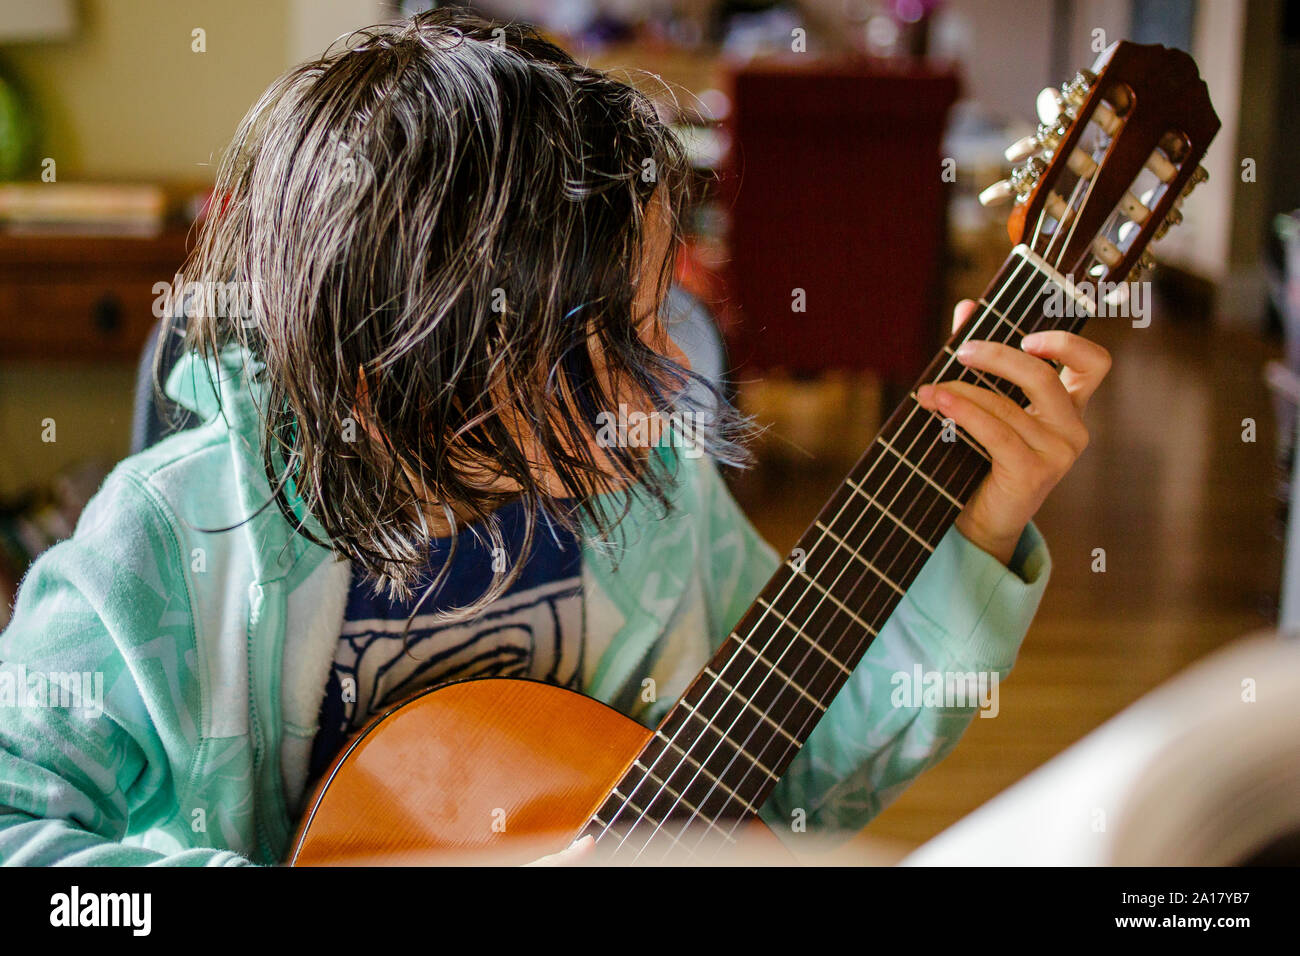 A child with hair hanging  in his face practices classical guitar Stock Photo